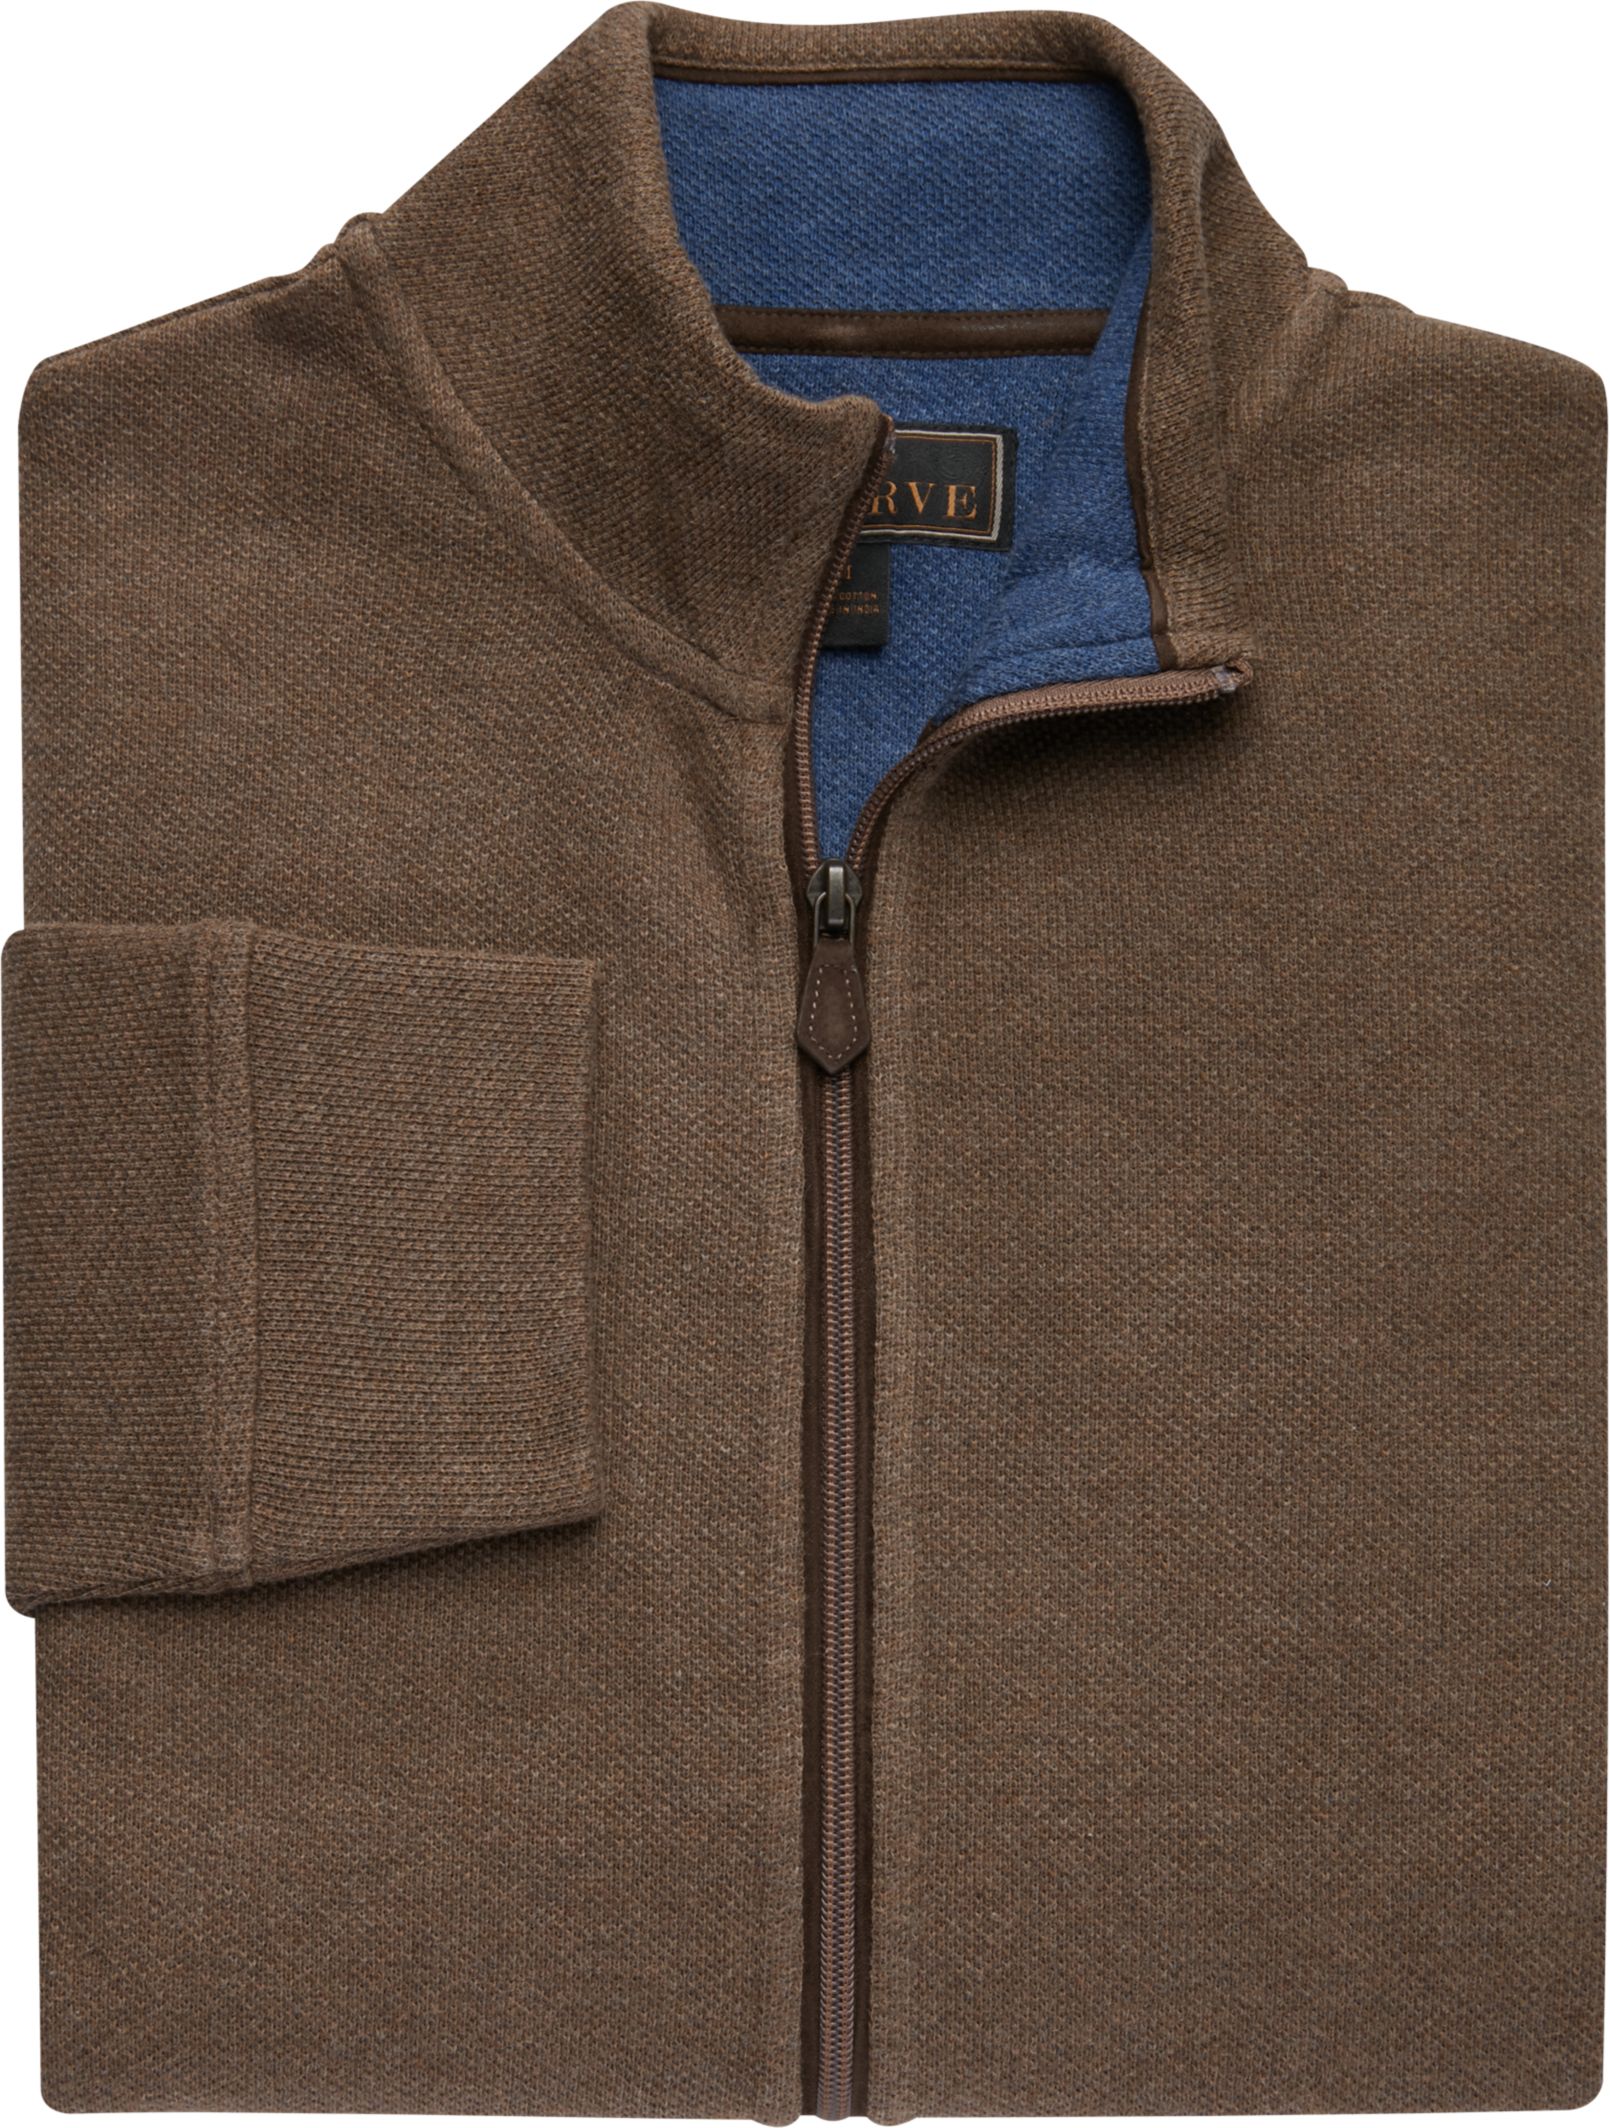 Reserve Collection Cotton Full-Zip Sweater CLEARANCE - $29 Pima Cotton ...